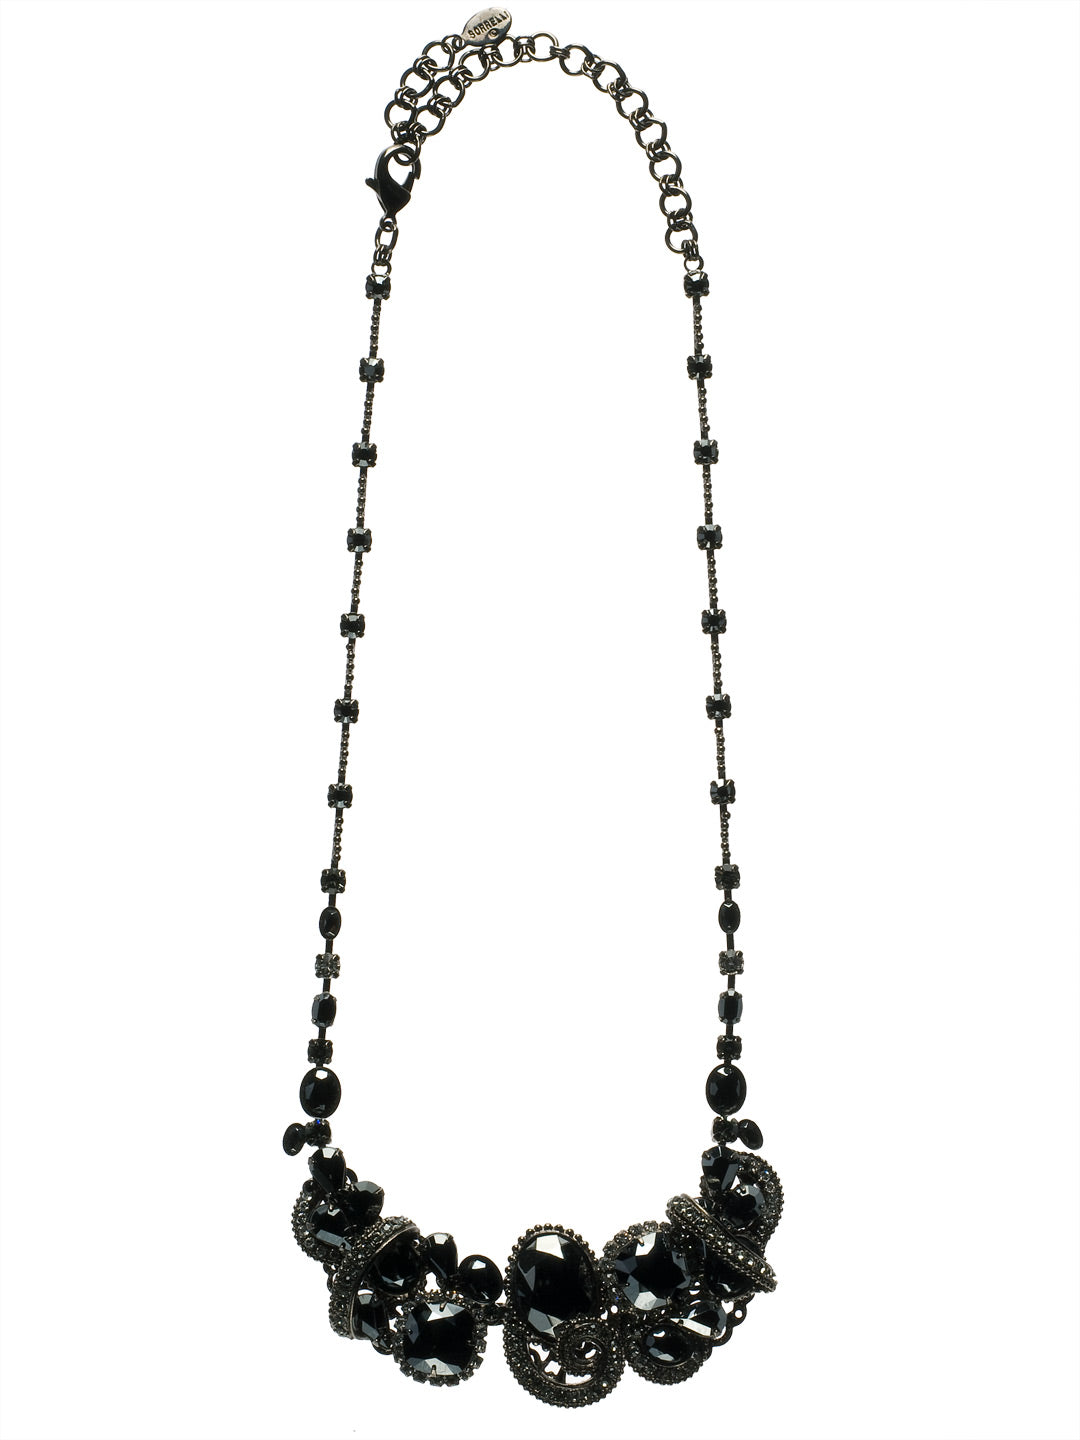 Aquatic Inspired Bib Necklace - NCC12GMMMO - <p>This trendy necklace boasts swirls of crystals inspired by the crashing waves upon the shore. With a variety of stone cuts intertwined together, it is sure to gleam from every angle. From Sorrelli's Midnight Moon collection in our Gun Metal finish.</p>